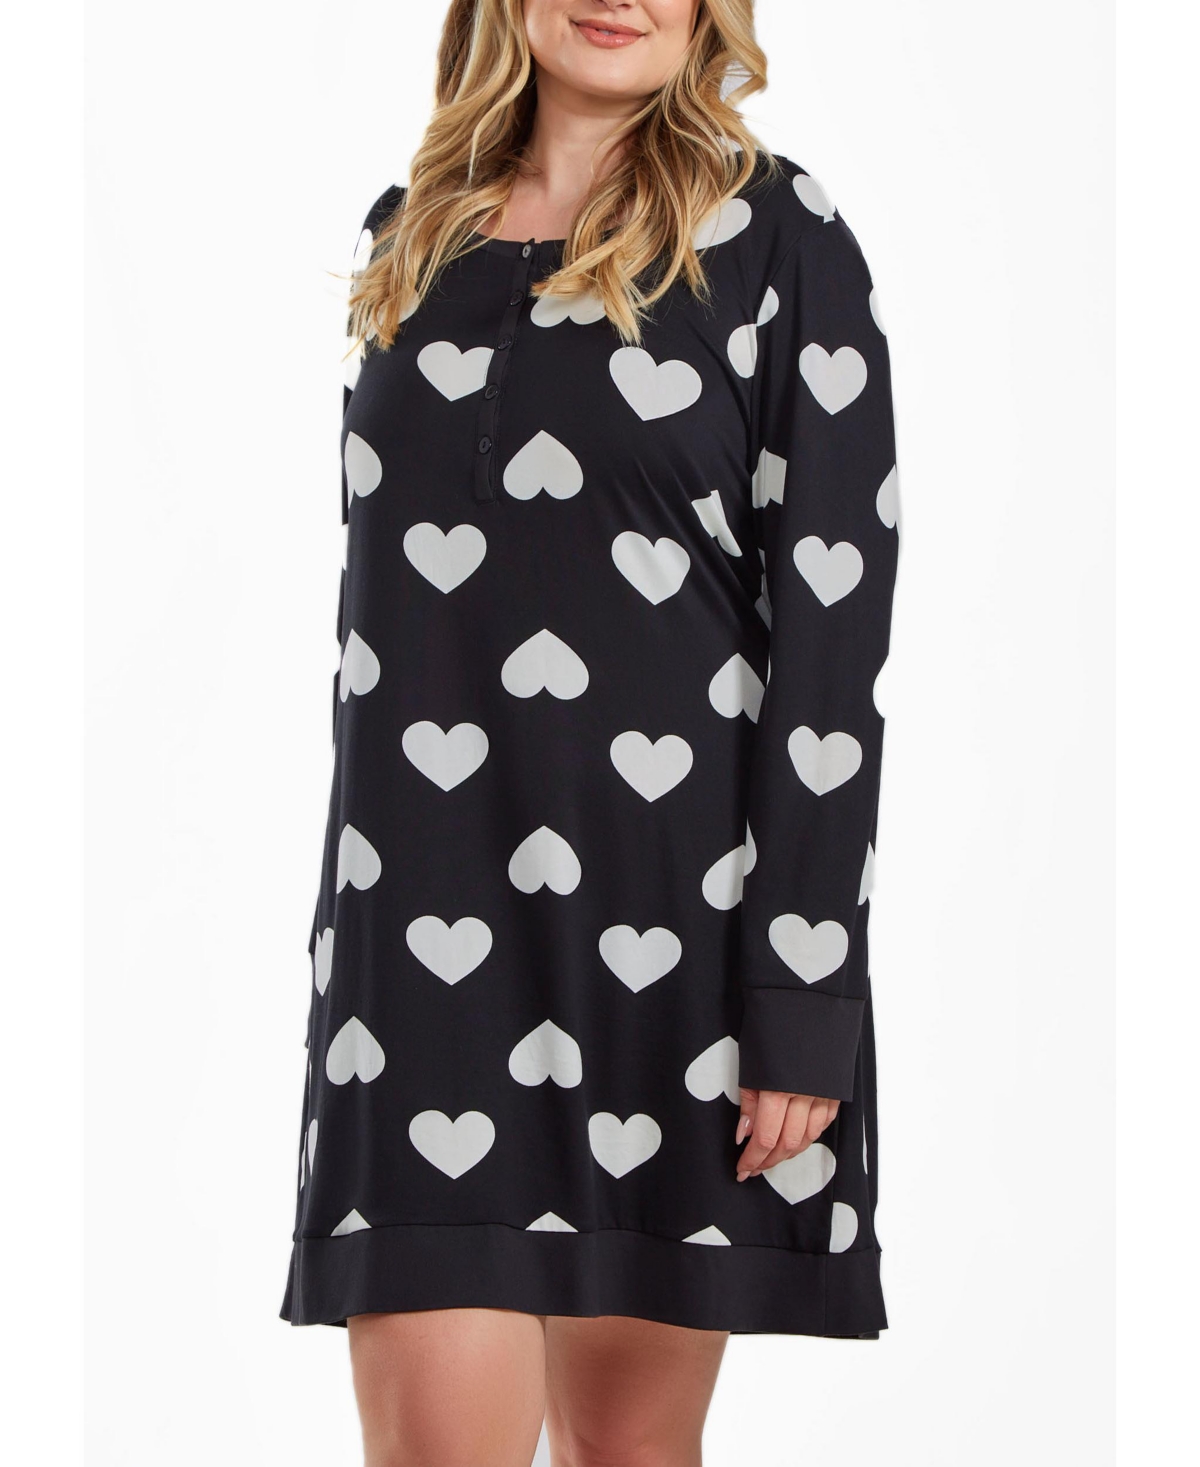 ICOLLECTION KIND HEART PLUS SIZE MODAL SLEEP TOP OR DRESS WITH BUTTON DOWN TOP IN COMFY COZY STYLE 